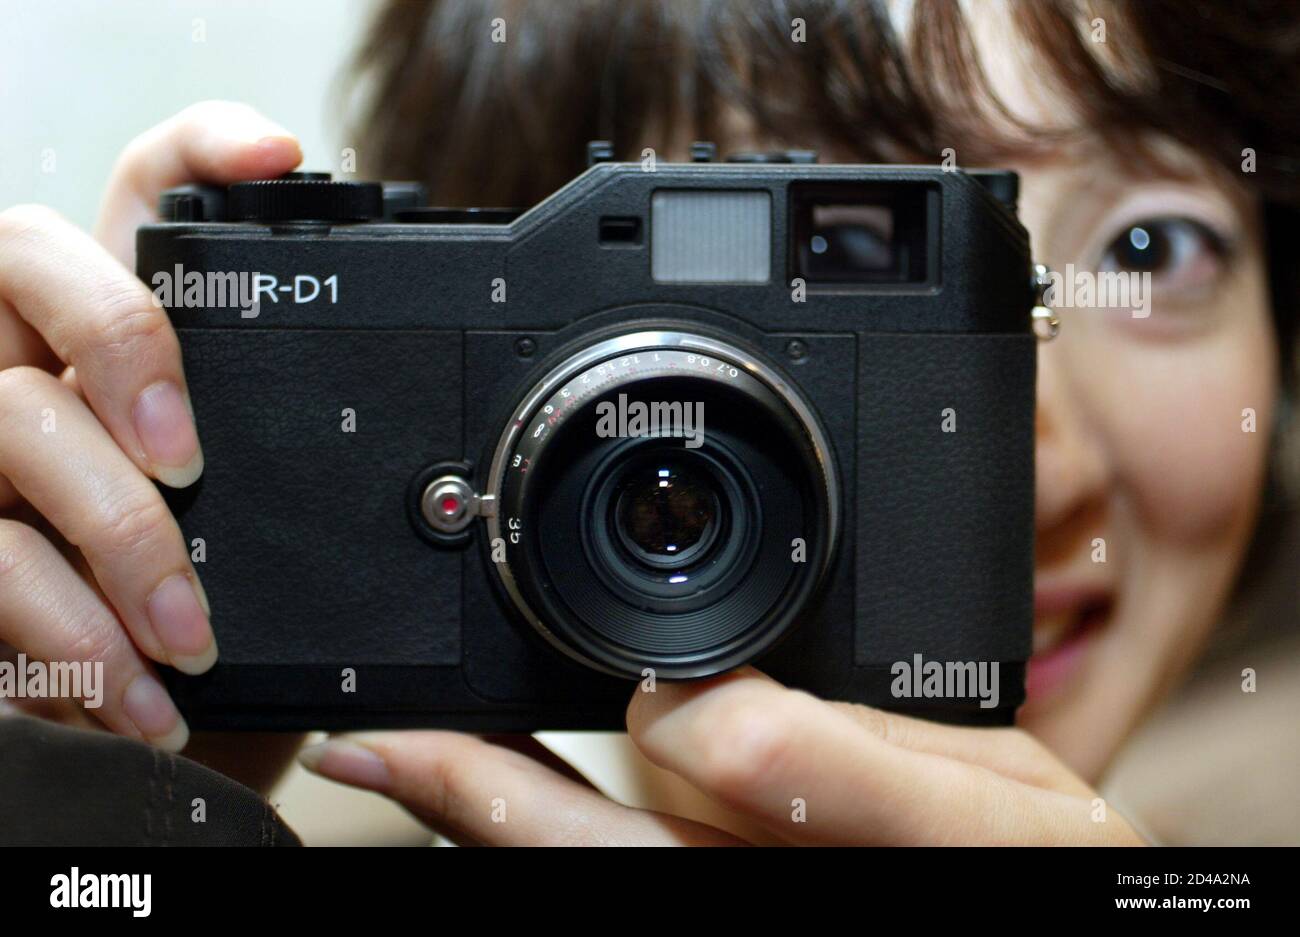 Seiko Epson Corporation's world's first rangefinder digial camera R-D1 is  displayed at a launch in Tokyo March 11, 2004. The  digital  camera, developed by Epson in partnership with Cosina Corp, accepts